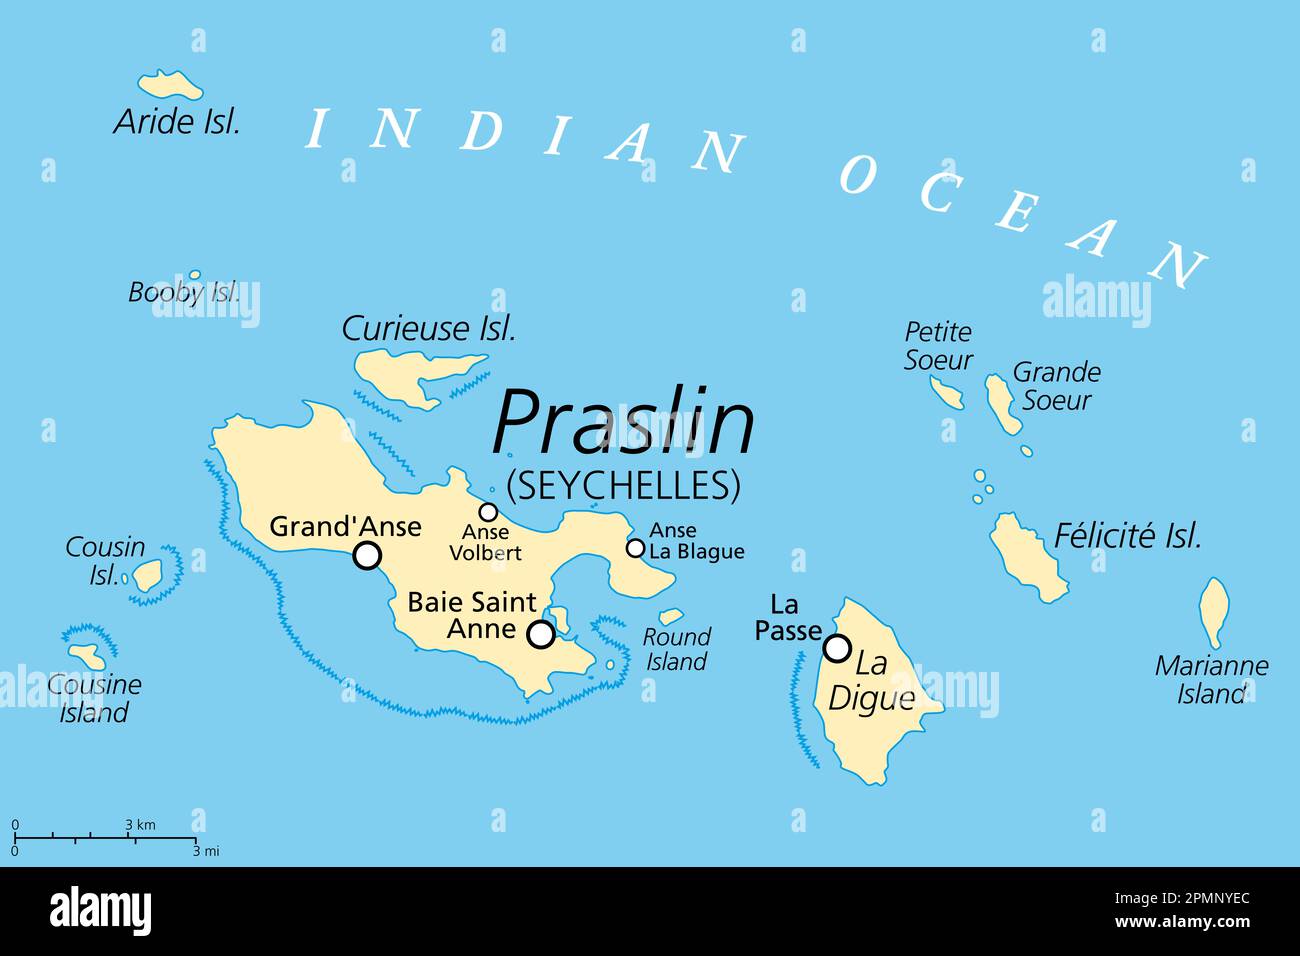 Praslin and nearby islands, political map. Second largest islands of the Seychelles, a Republic and archipelagic state in the Indian Ocean. Stock Photo